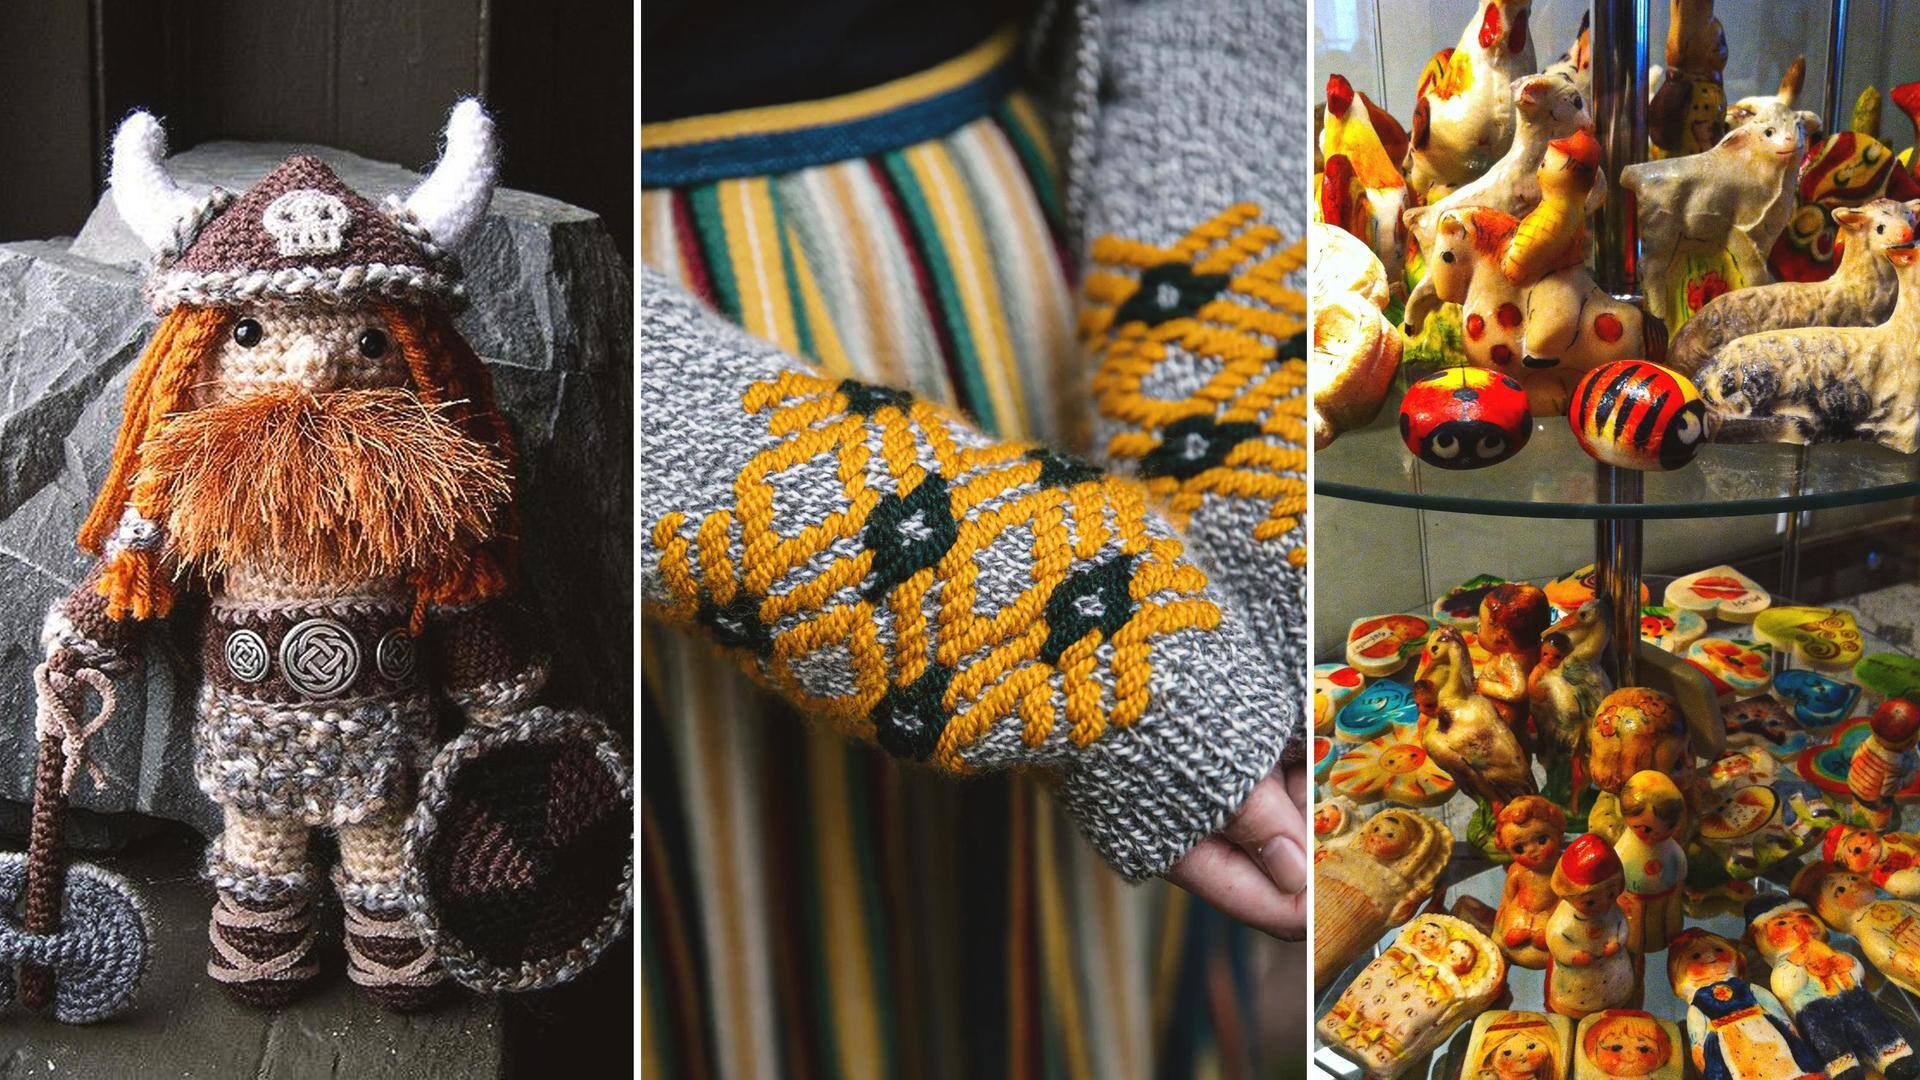 Estonia calling? Get your hands on these beautiful souvenirs